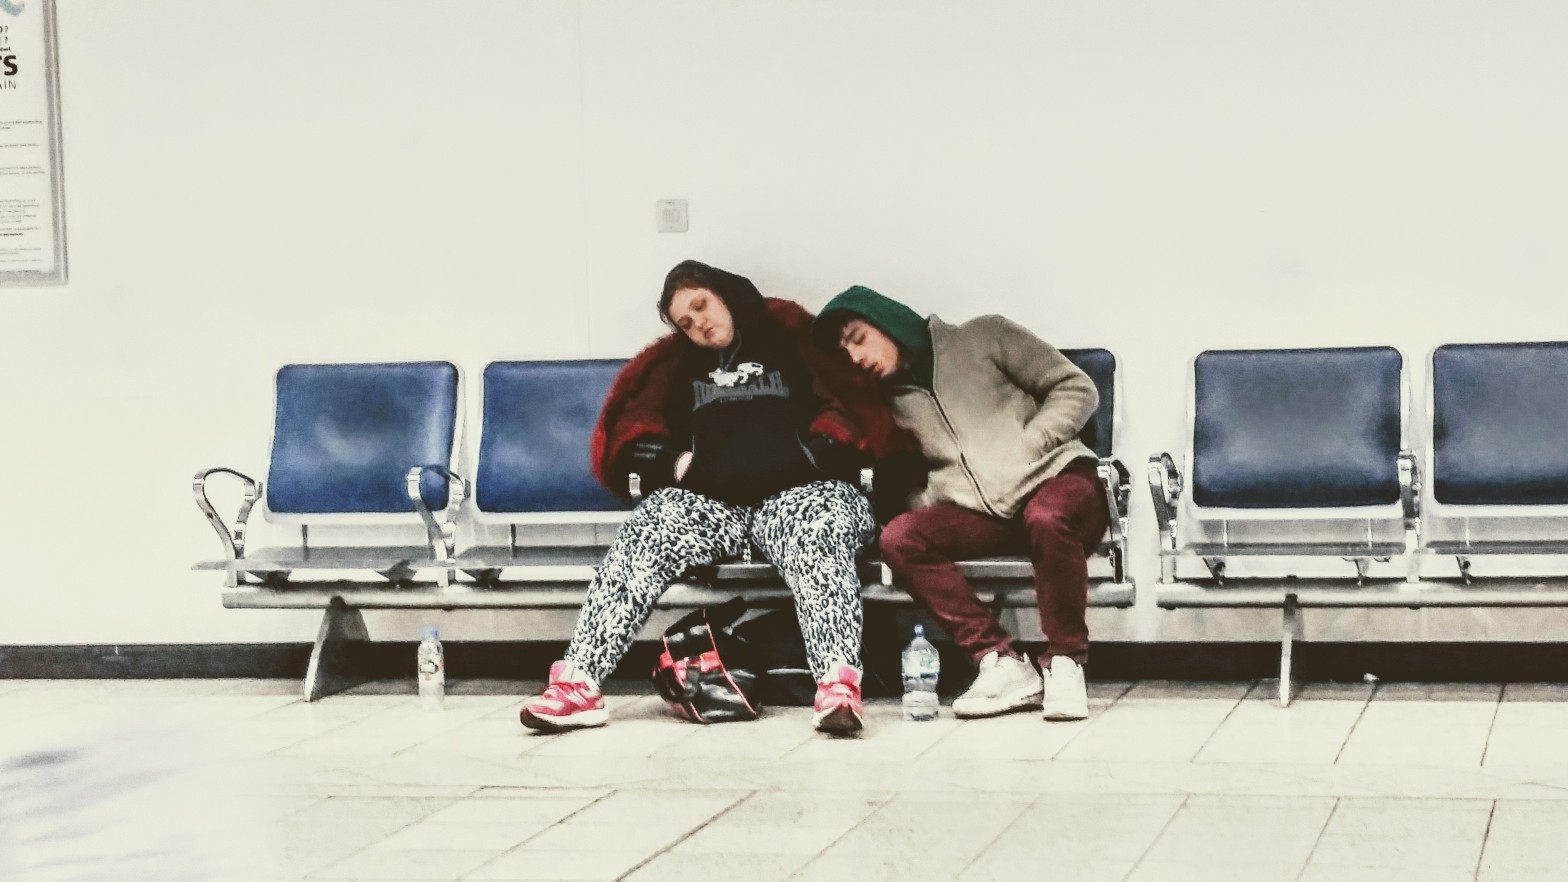 A woman and a boy sleeping on a the aligned chairs of an airport